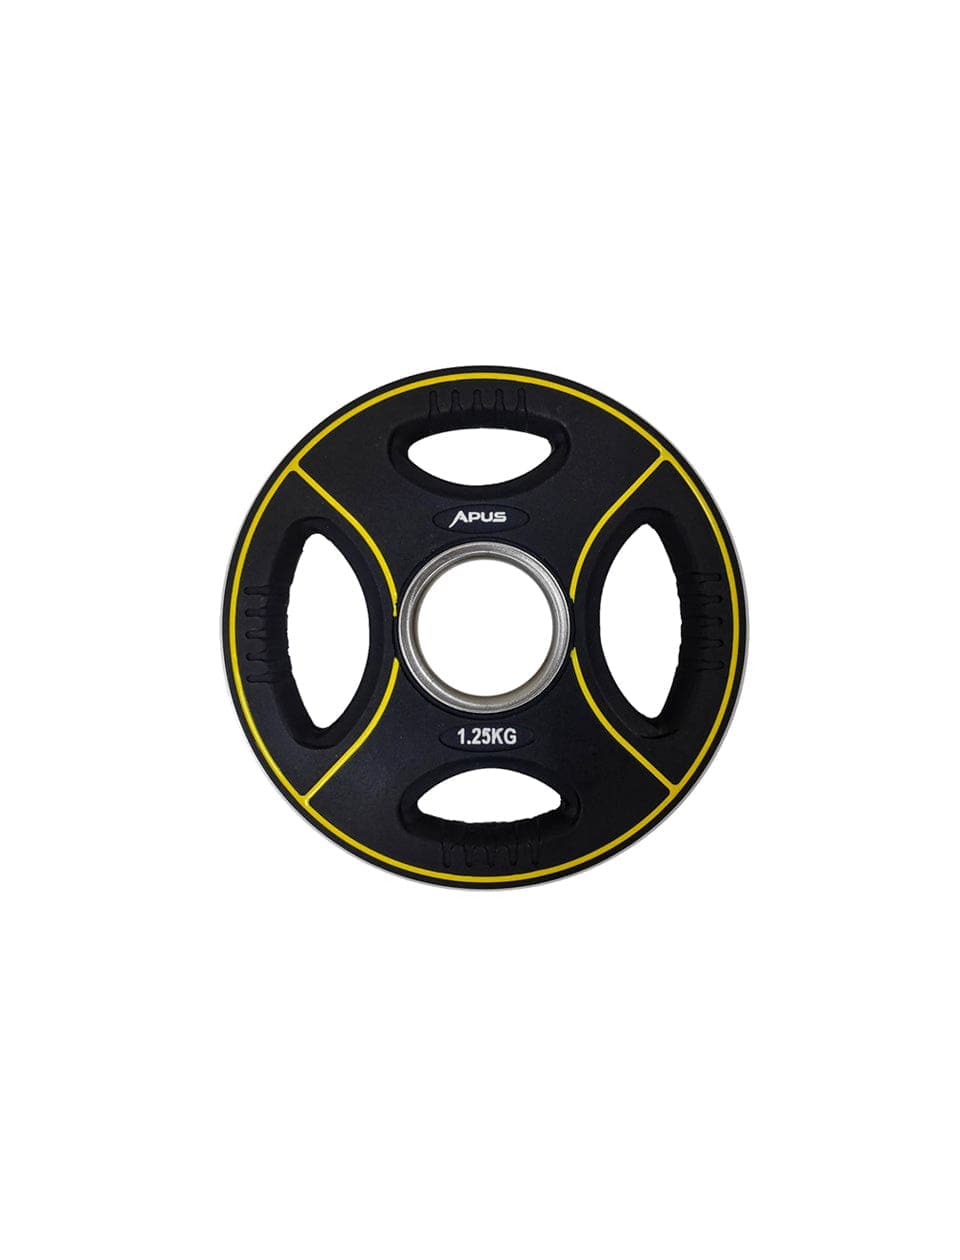 Apus Premium Olympic Rubber Weight Plates (1.25 to 25 KG) - With 3 years commercial warranty - Athletix.ae